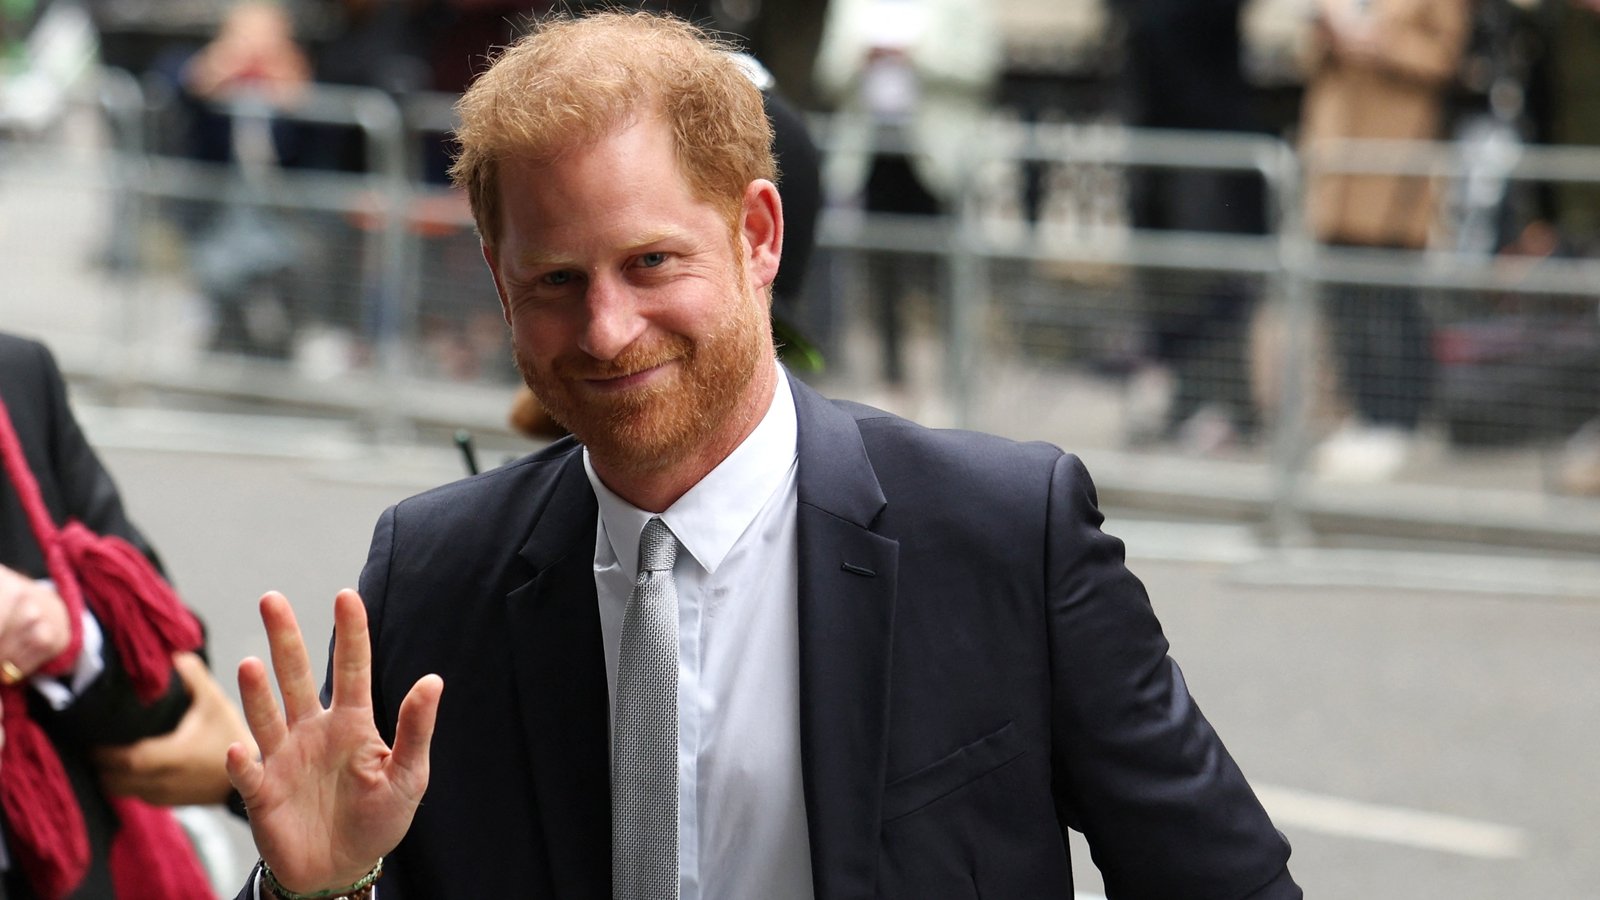 Lots riding on outcome of Prince Harry phone hack case